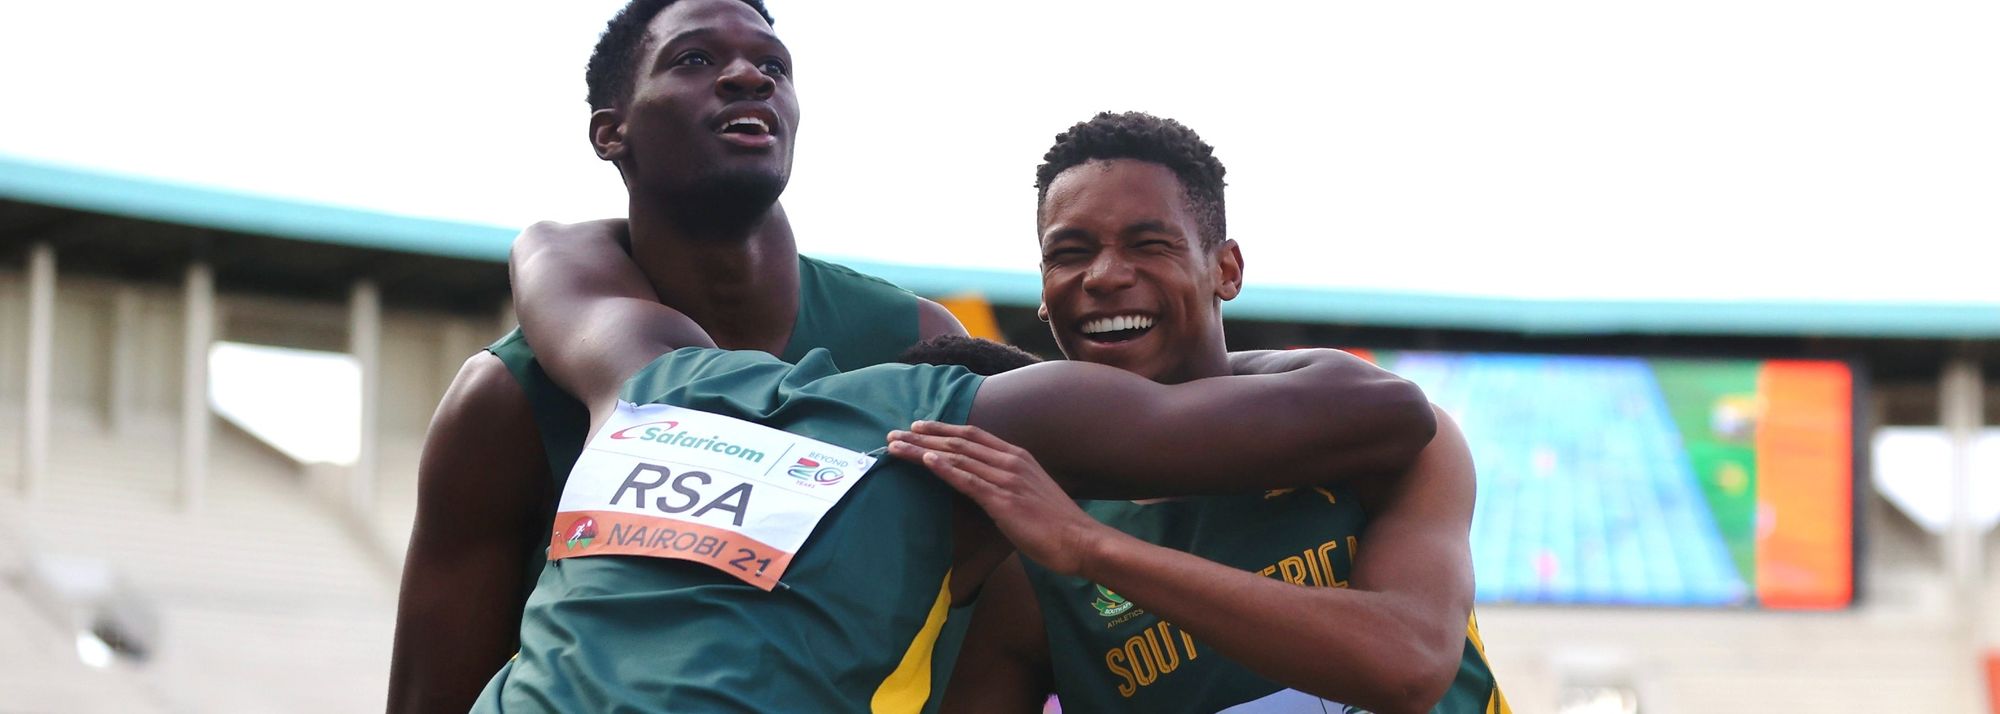 The World U20 Championships came to a climax with Jamaica and South Africa setting world U20 records in the women's and men’s 4x100m.